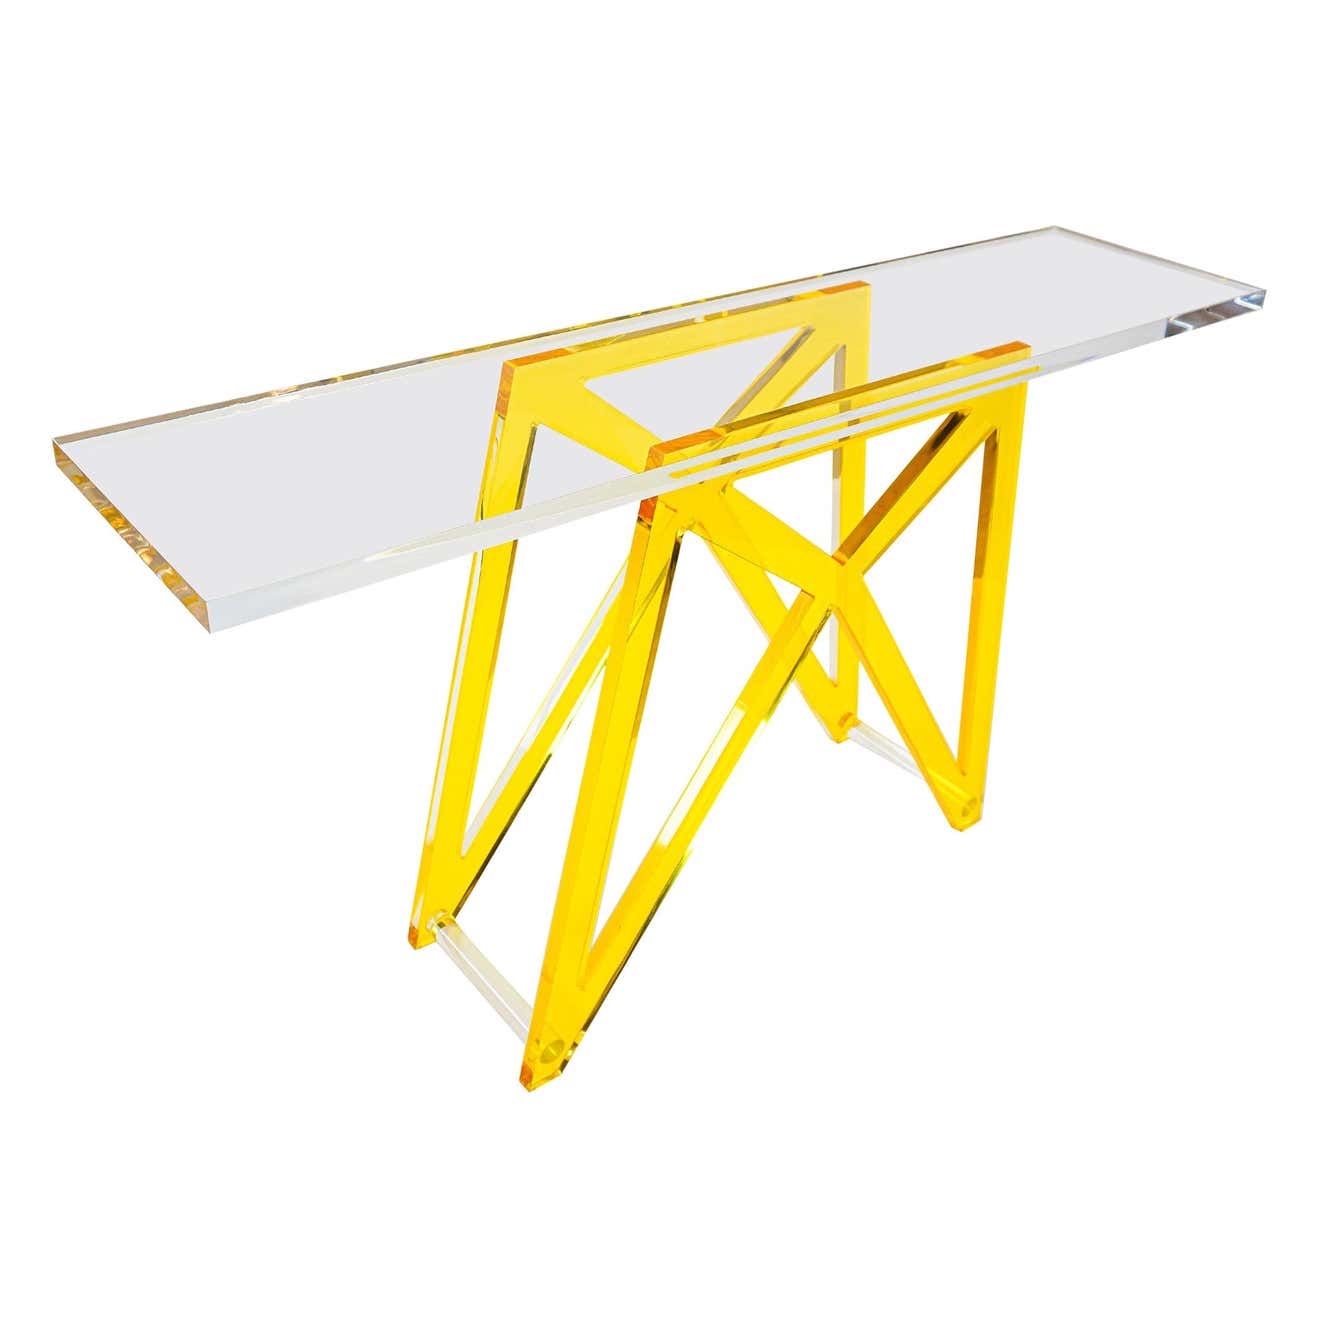 YELLOW LEG COLORED LUCITE CONSOLE TABLE